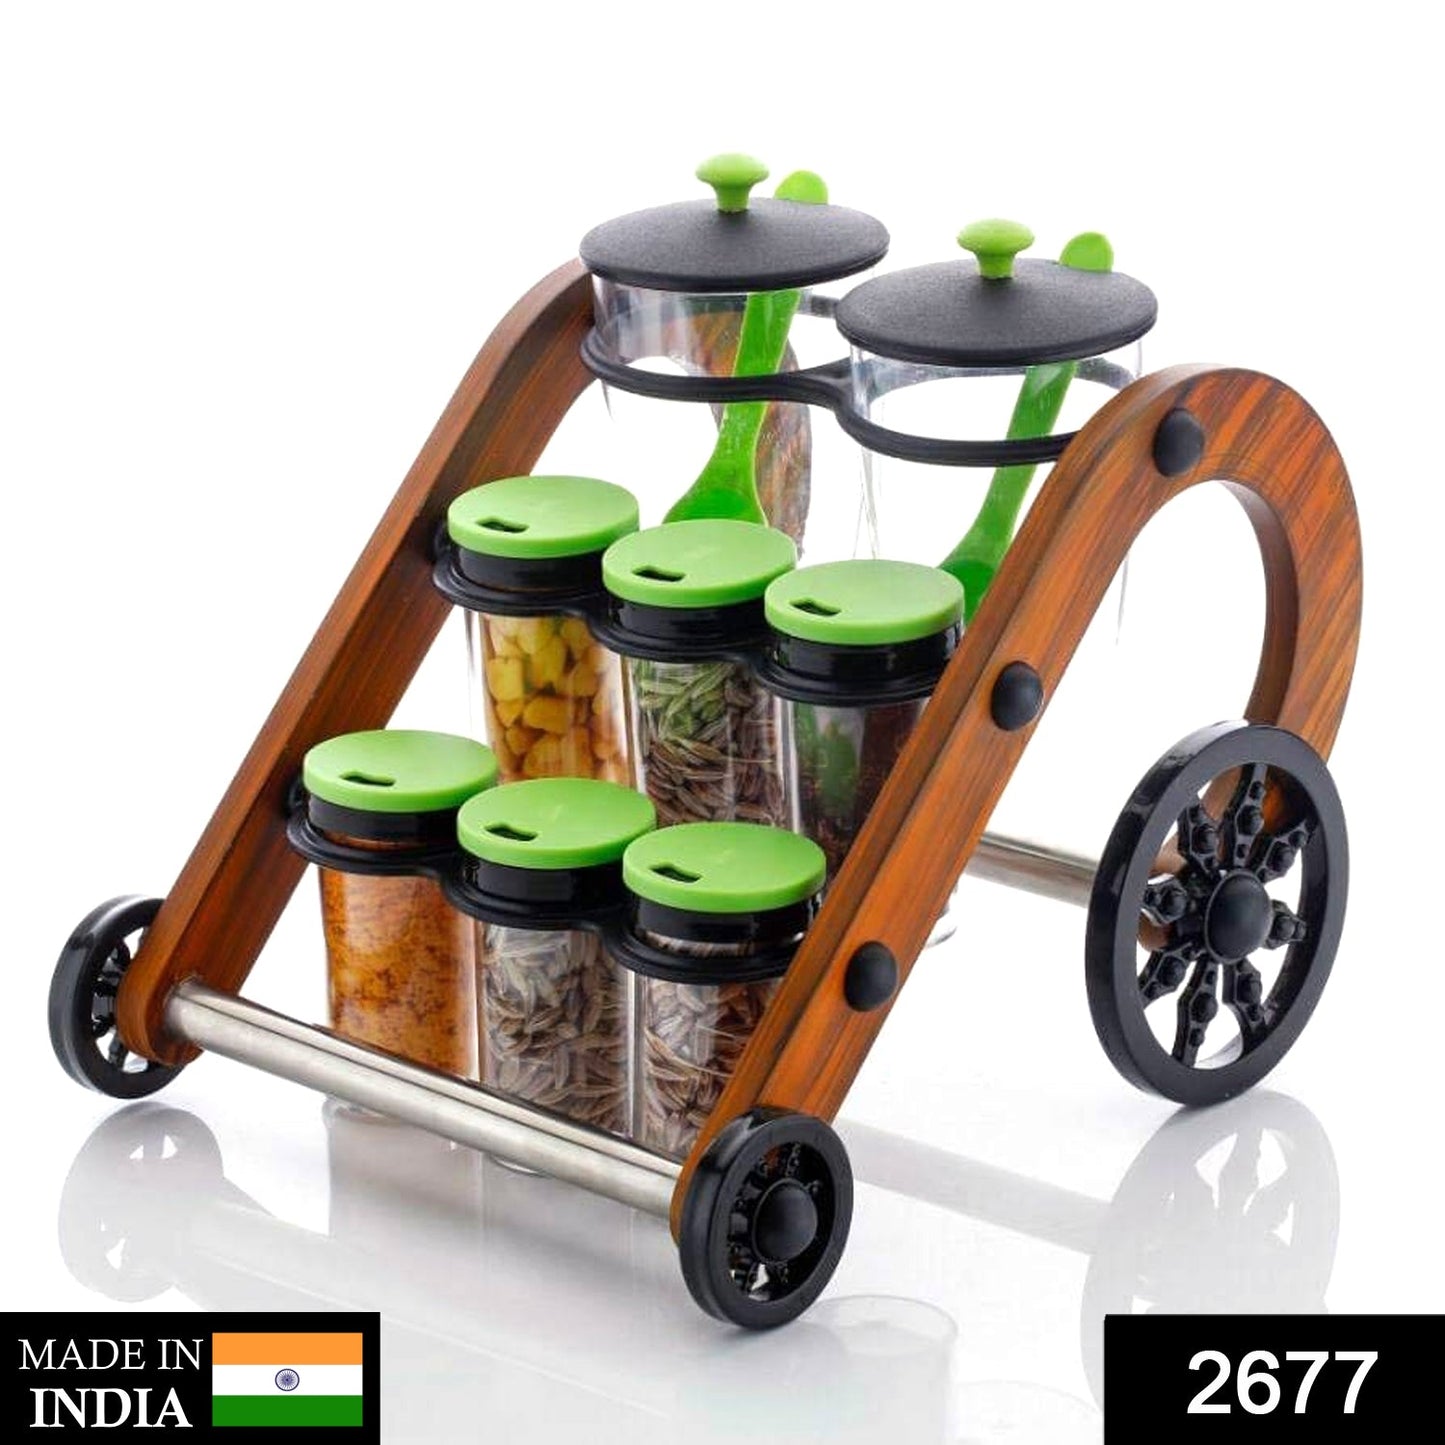 2677 Rajwadi Spice Jar Stand and holder for supporting jars, bottles etc. including all kitchen purposes.